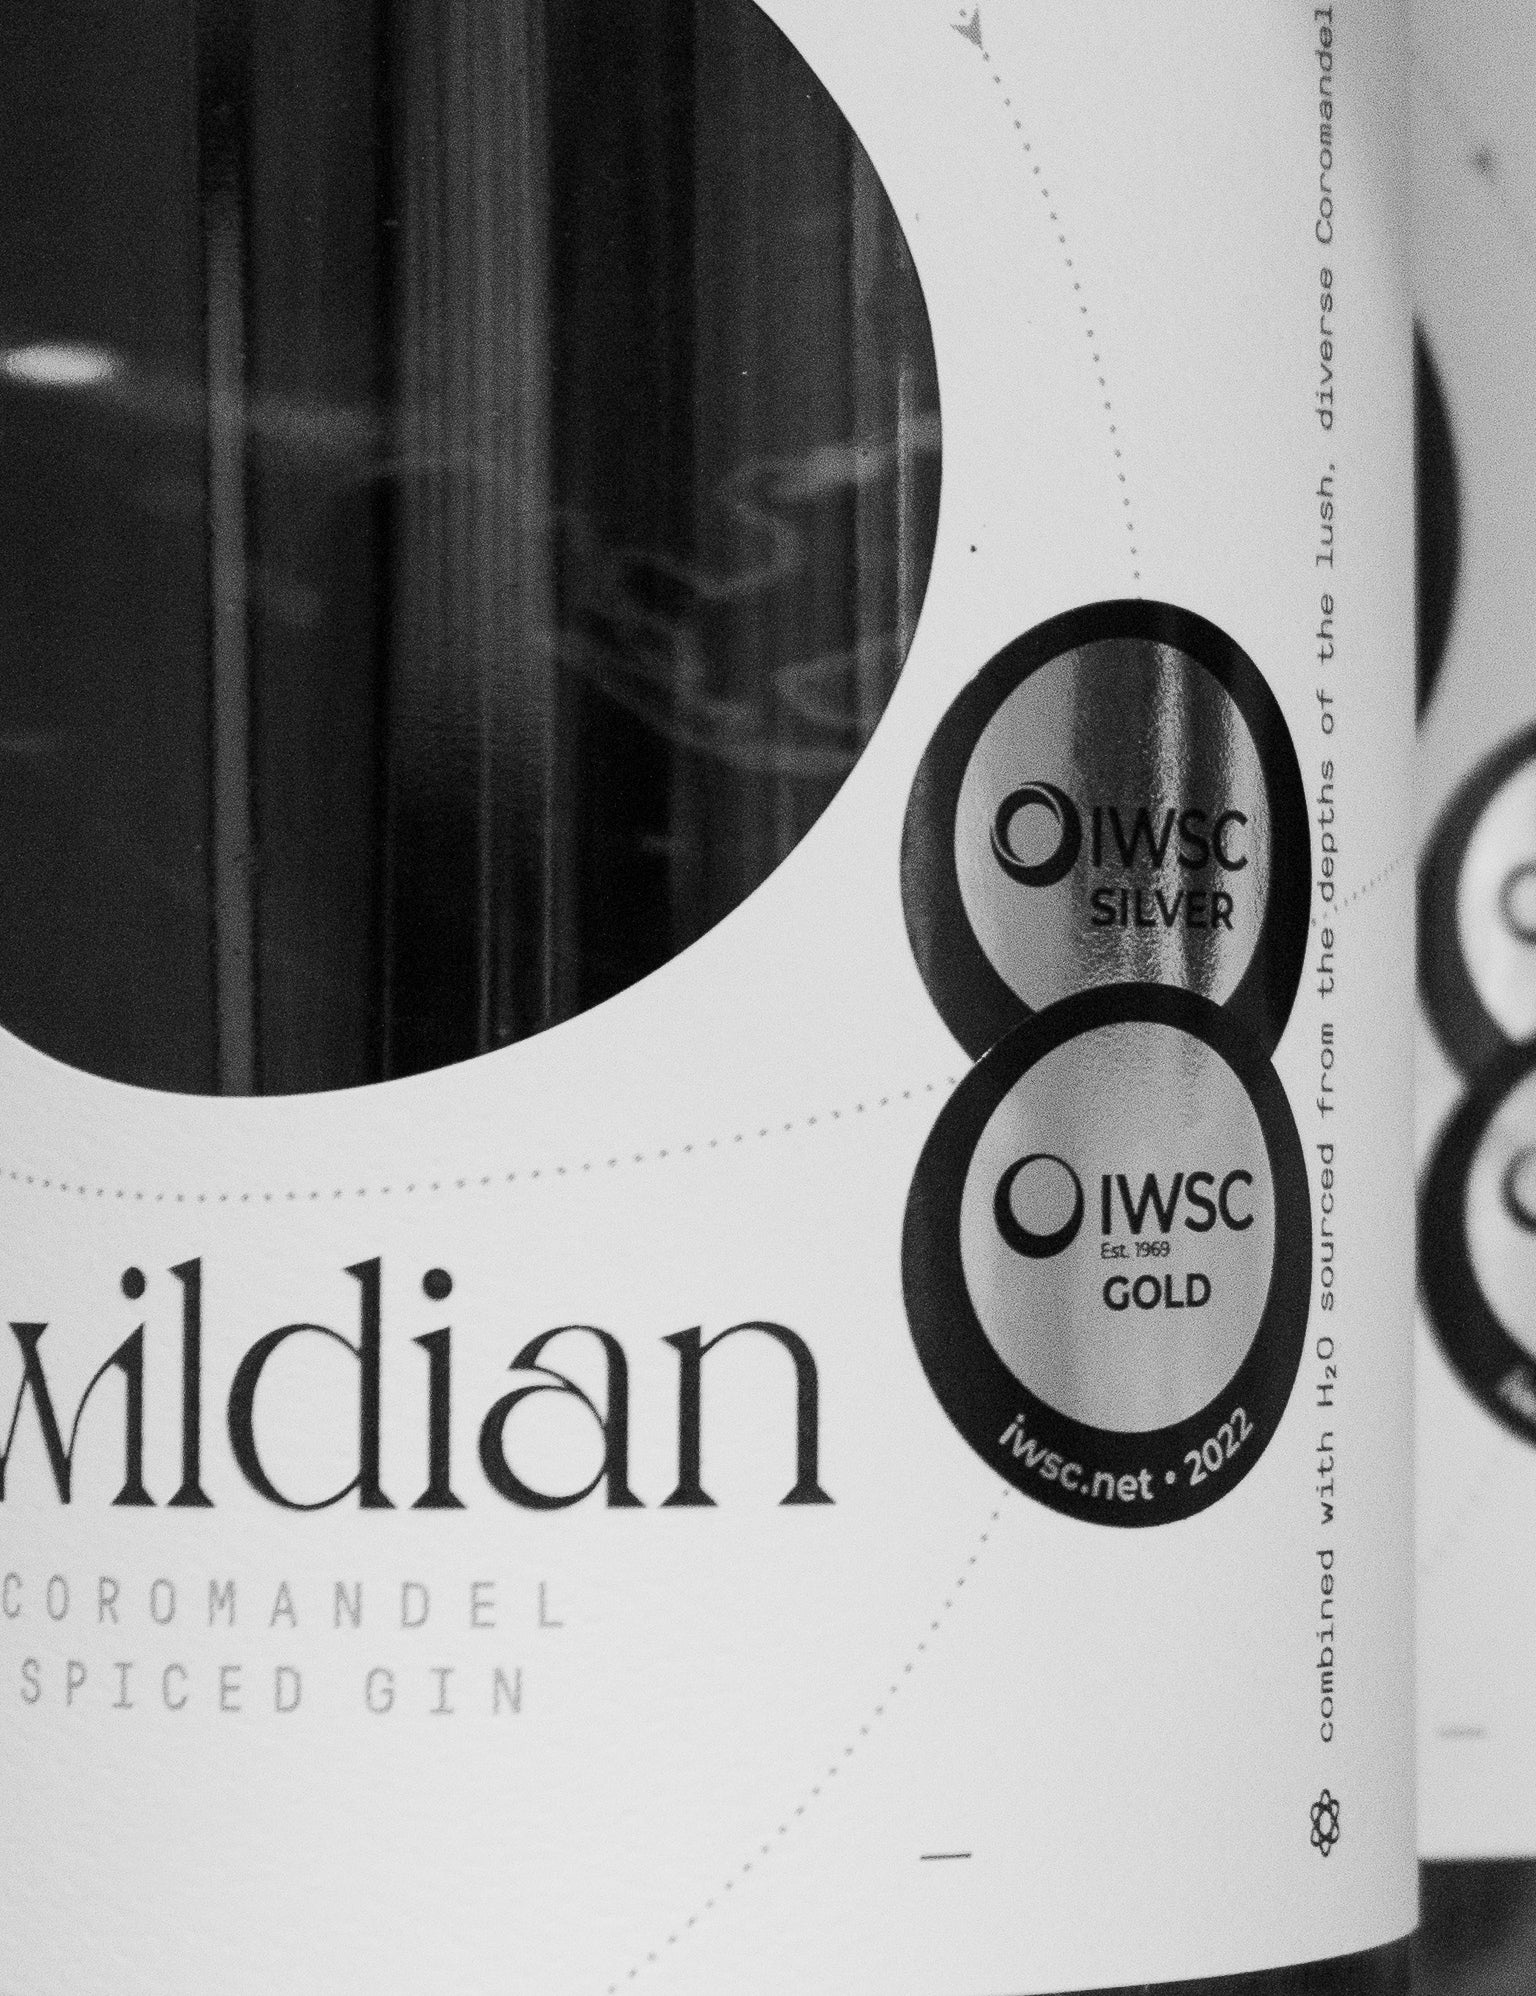 Our Coromandel Spiced gin has been internationally awarded, including at the International Wine and Spirits Competition 